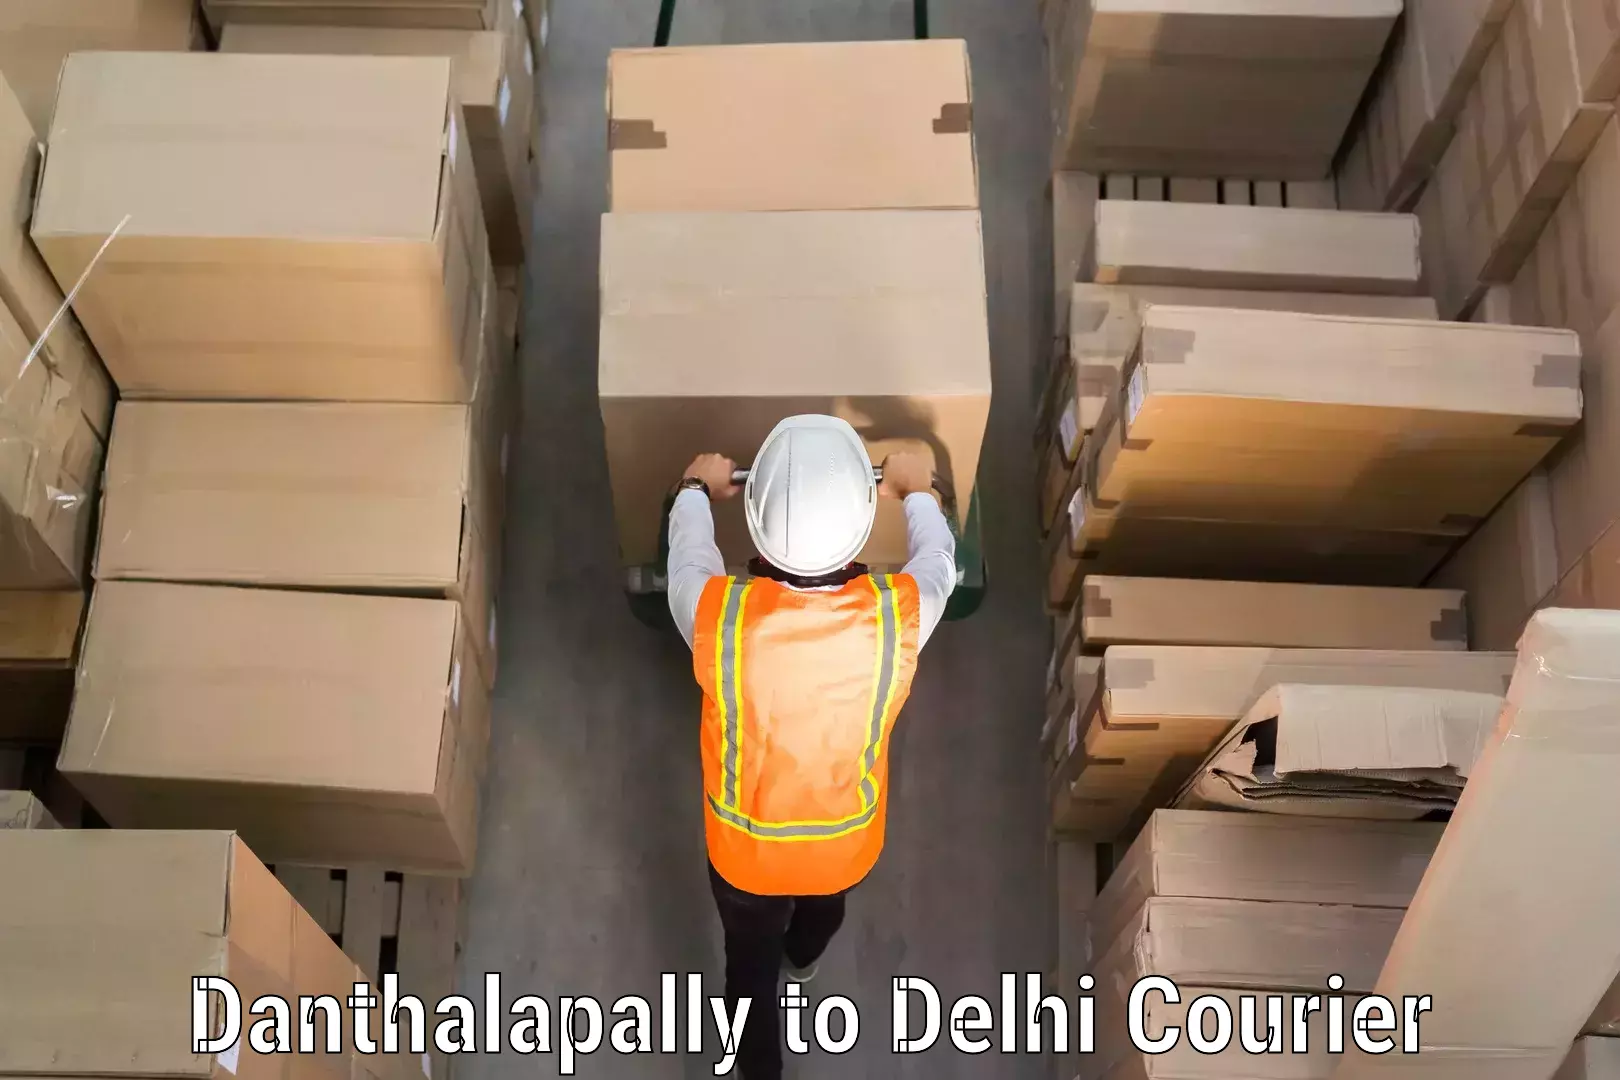 Door-to-door baggage service Danthalapally to NCR